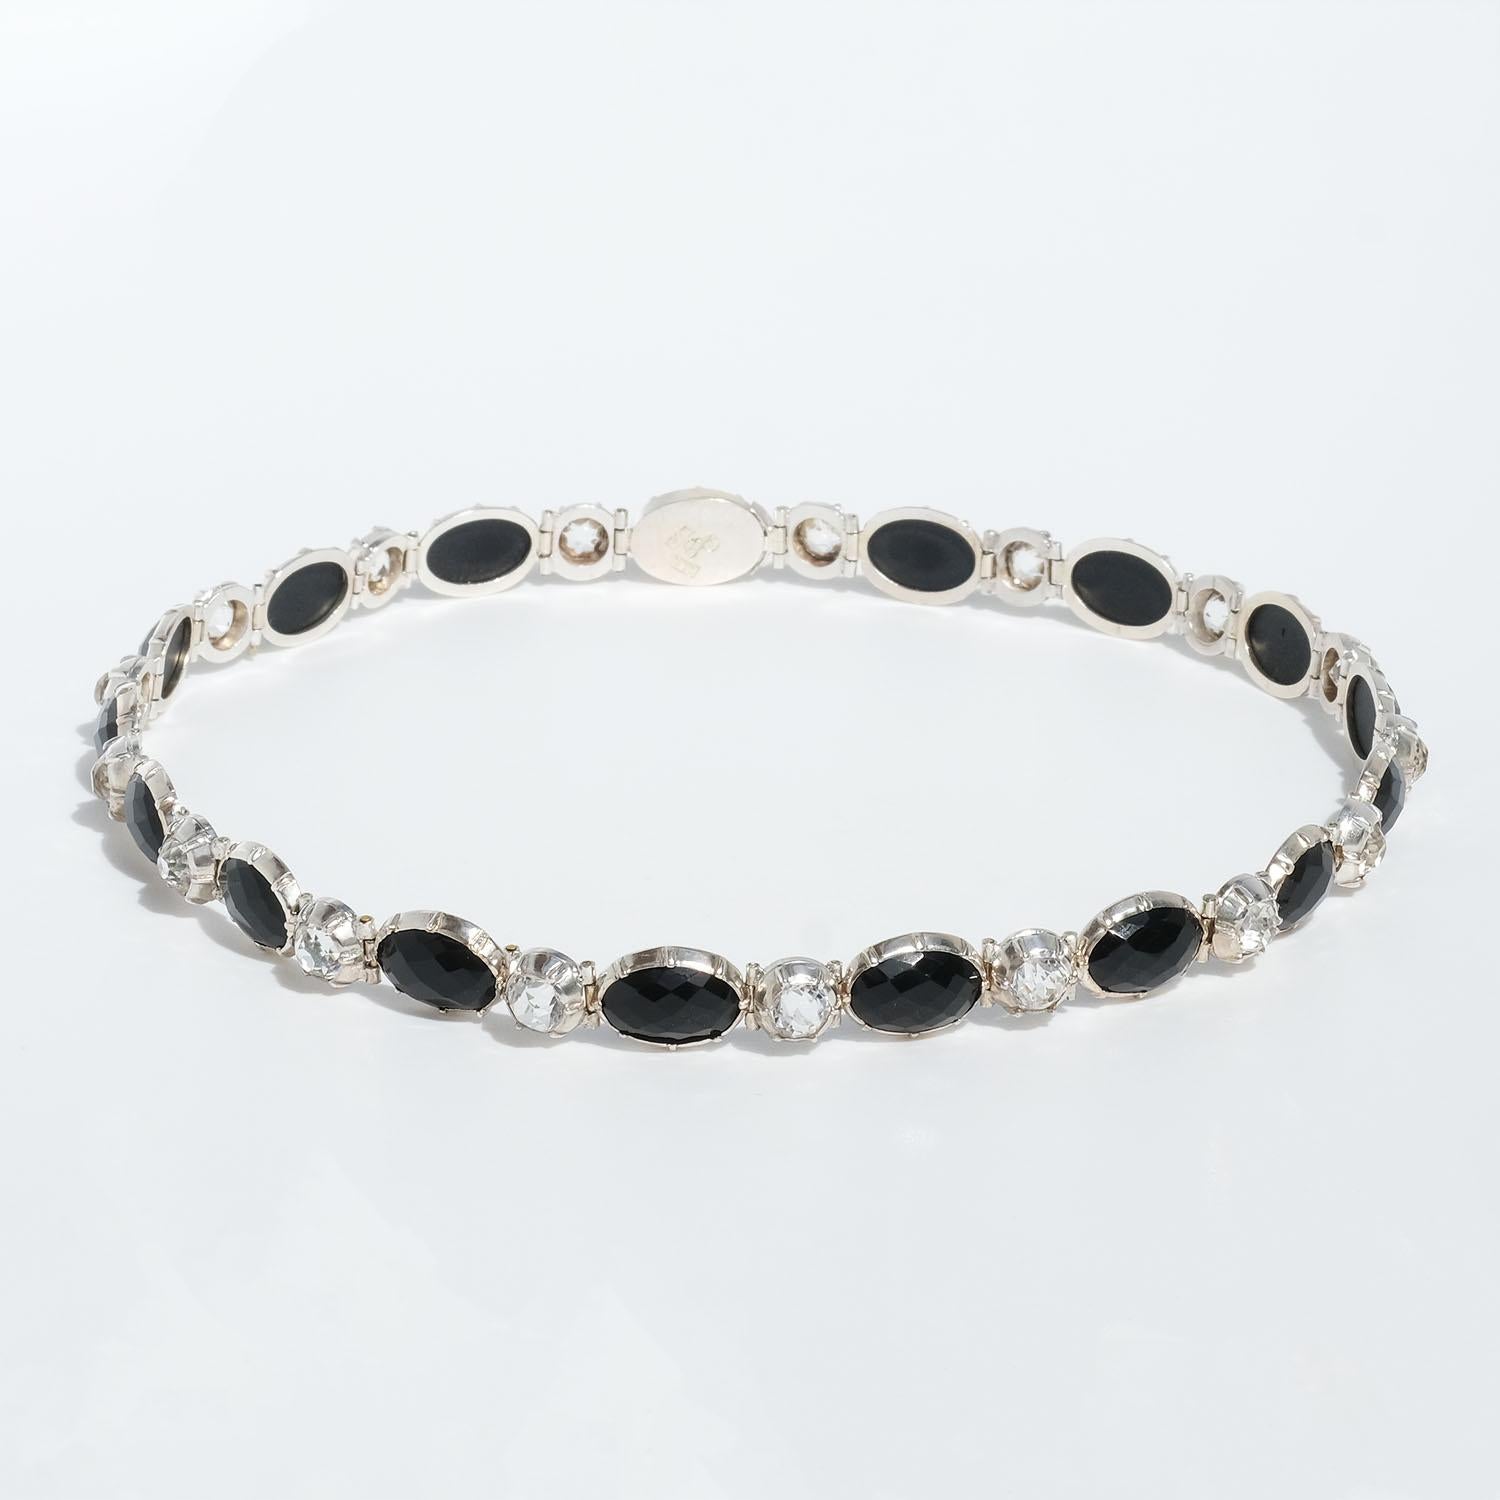 This sterling silver choker necklace is adorned with oval onyx stones and round rock crystals which are placed together with small hinges. The necklace closes easily with a clasp box.

It is made by the Swedish Master Carl Johan Häggström I the year